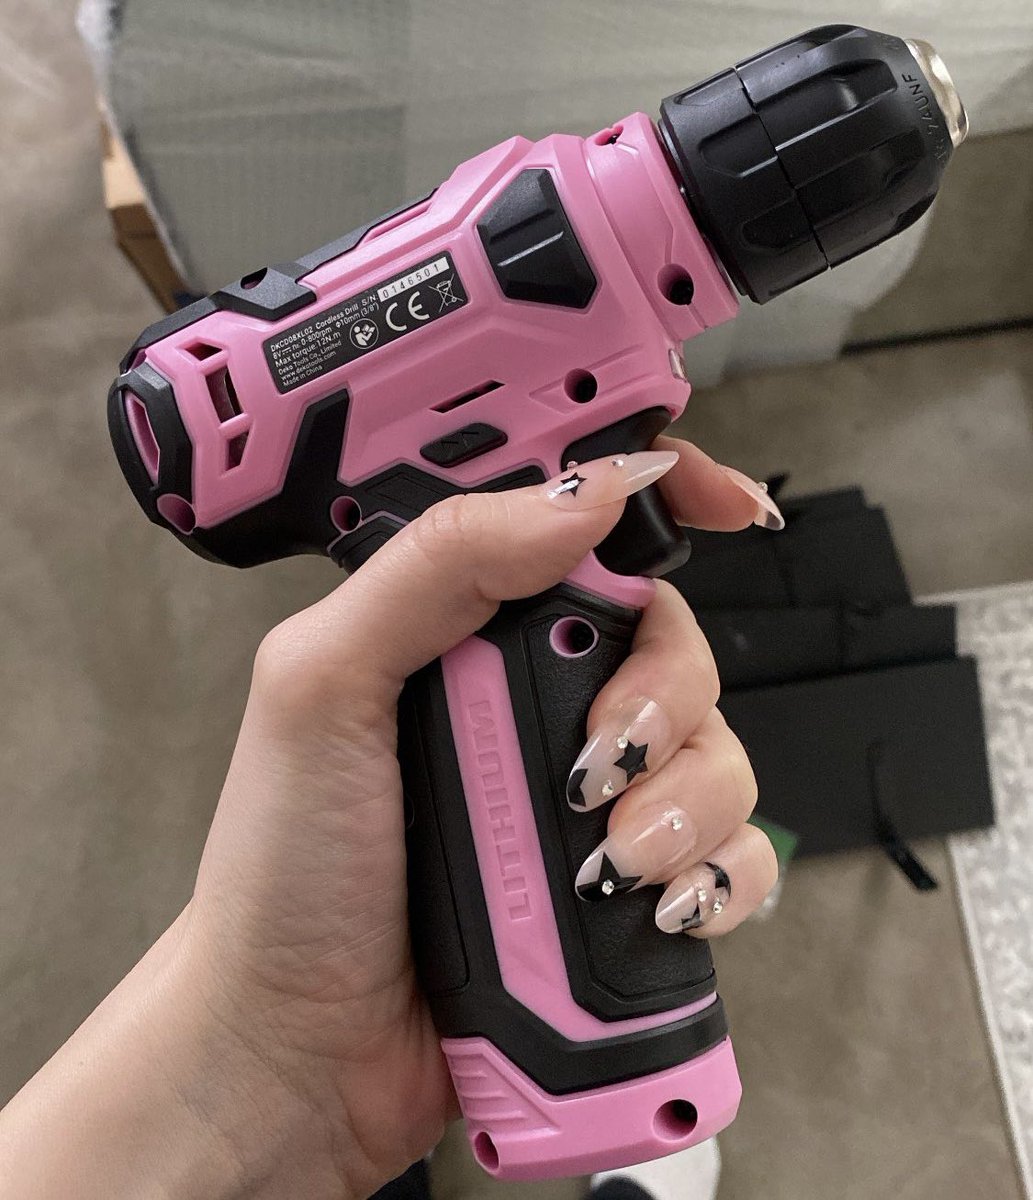 i’m not a home repairs girlie but i’m moving apartments so i bought a drill & accidentally served cunt so hard w this drill/nail combo like RUKM MISS INDEPENDENT OKKK 🗣️🗣️🗣️🗣️